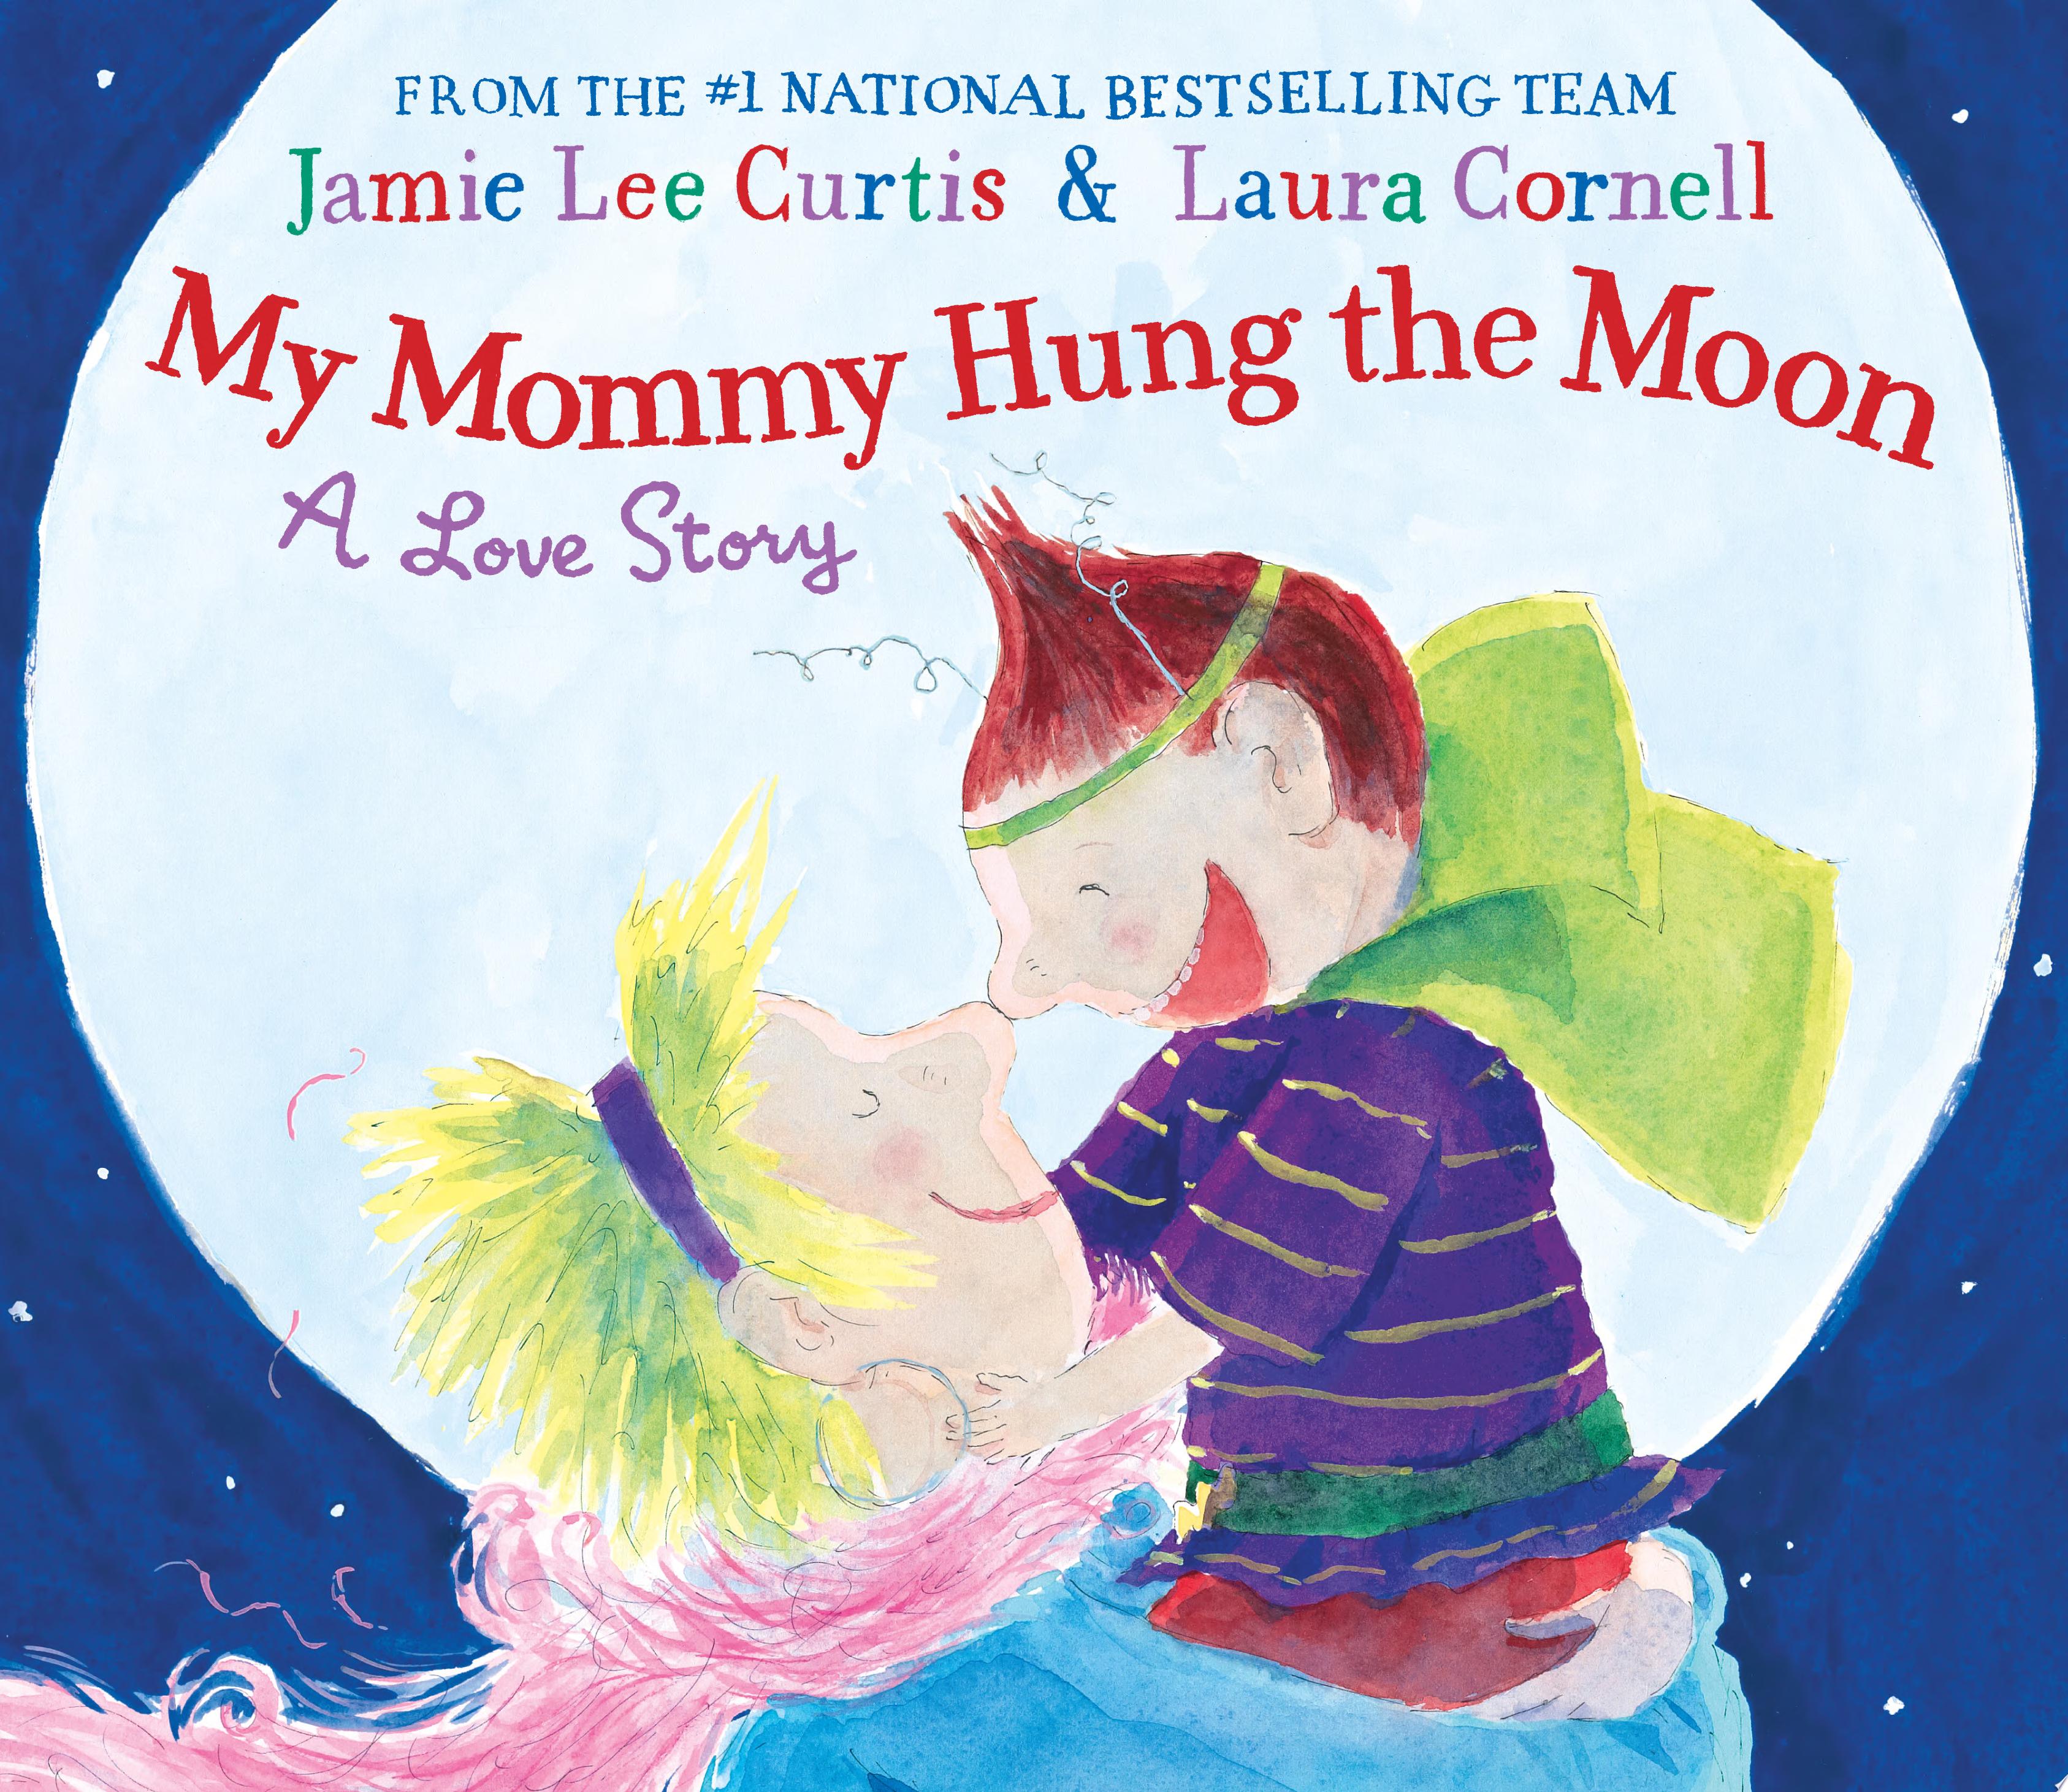 Image for "My Mommy Hung the Moon"